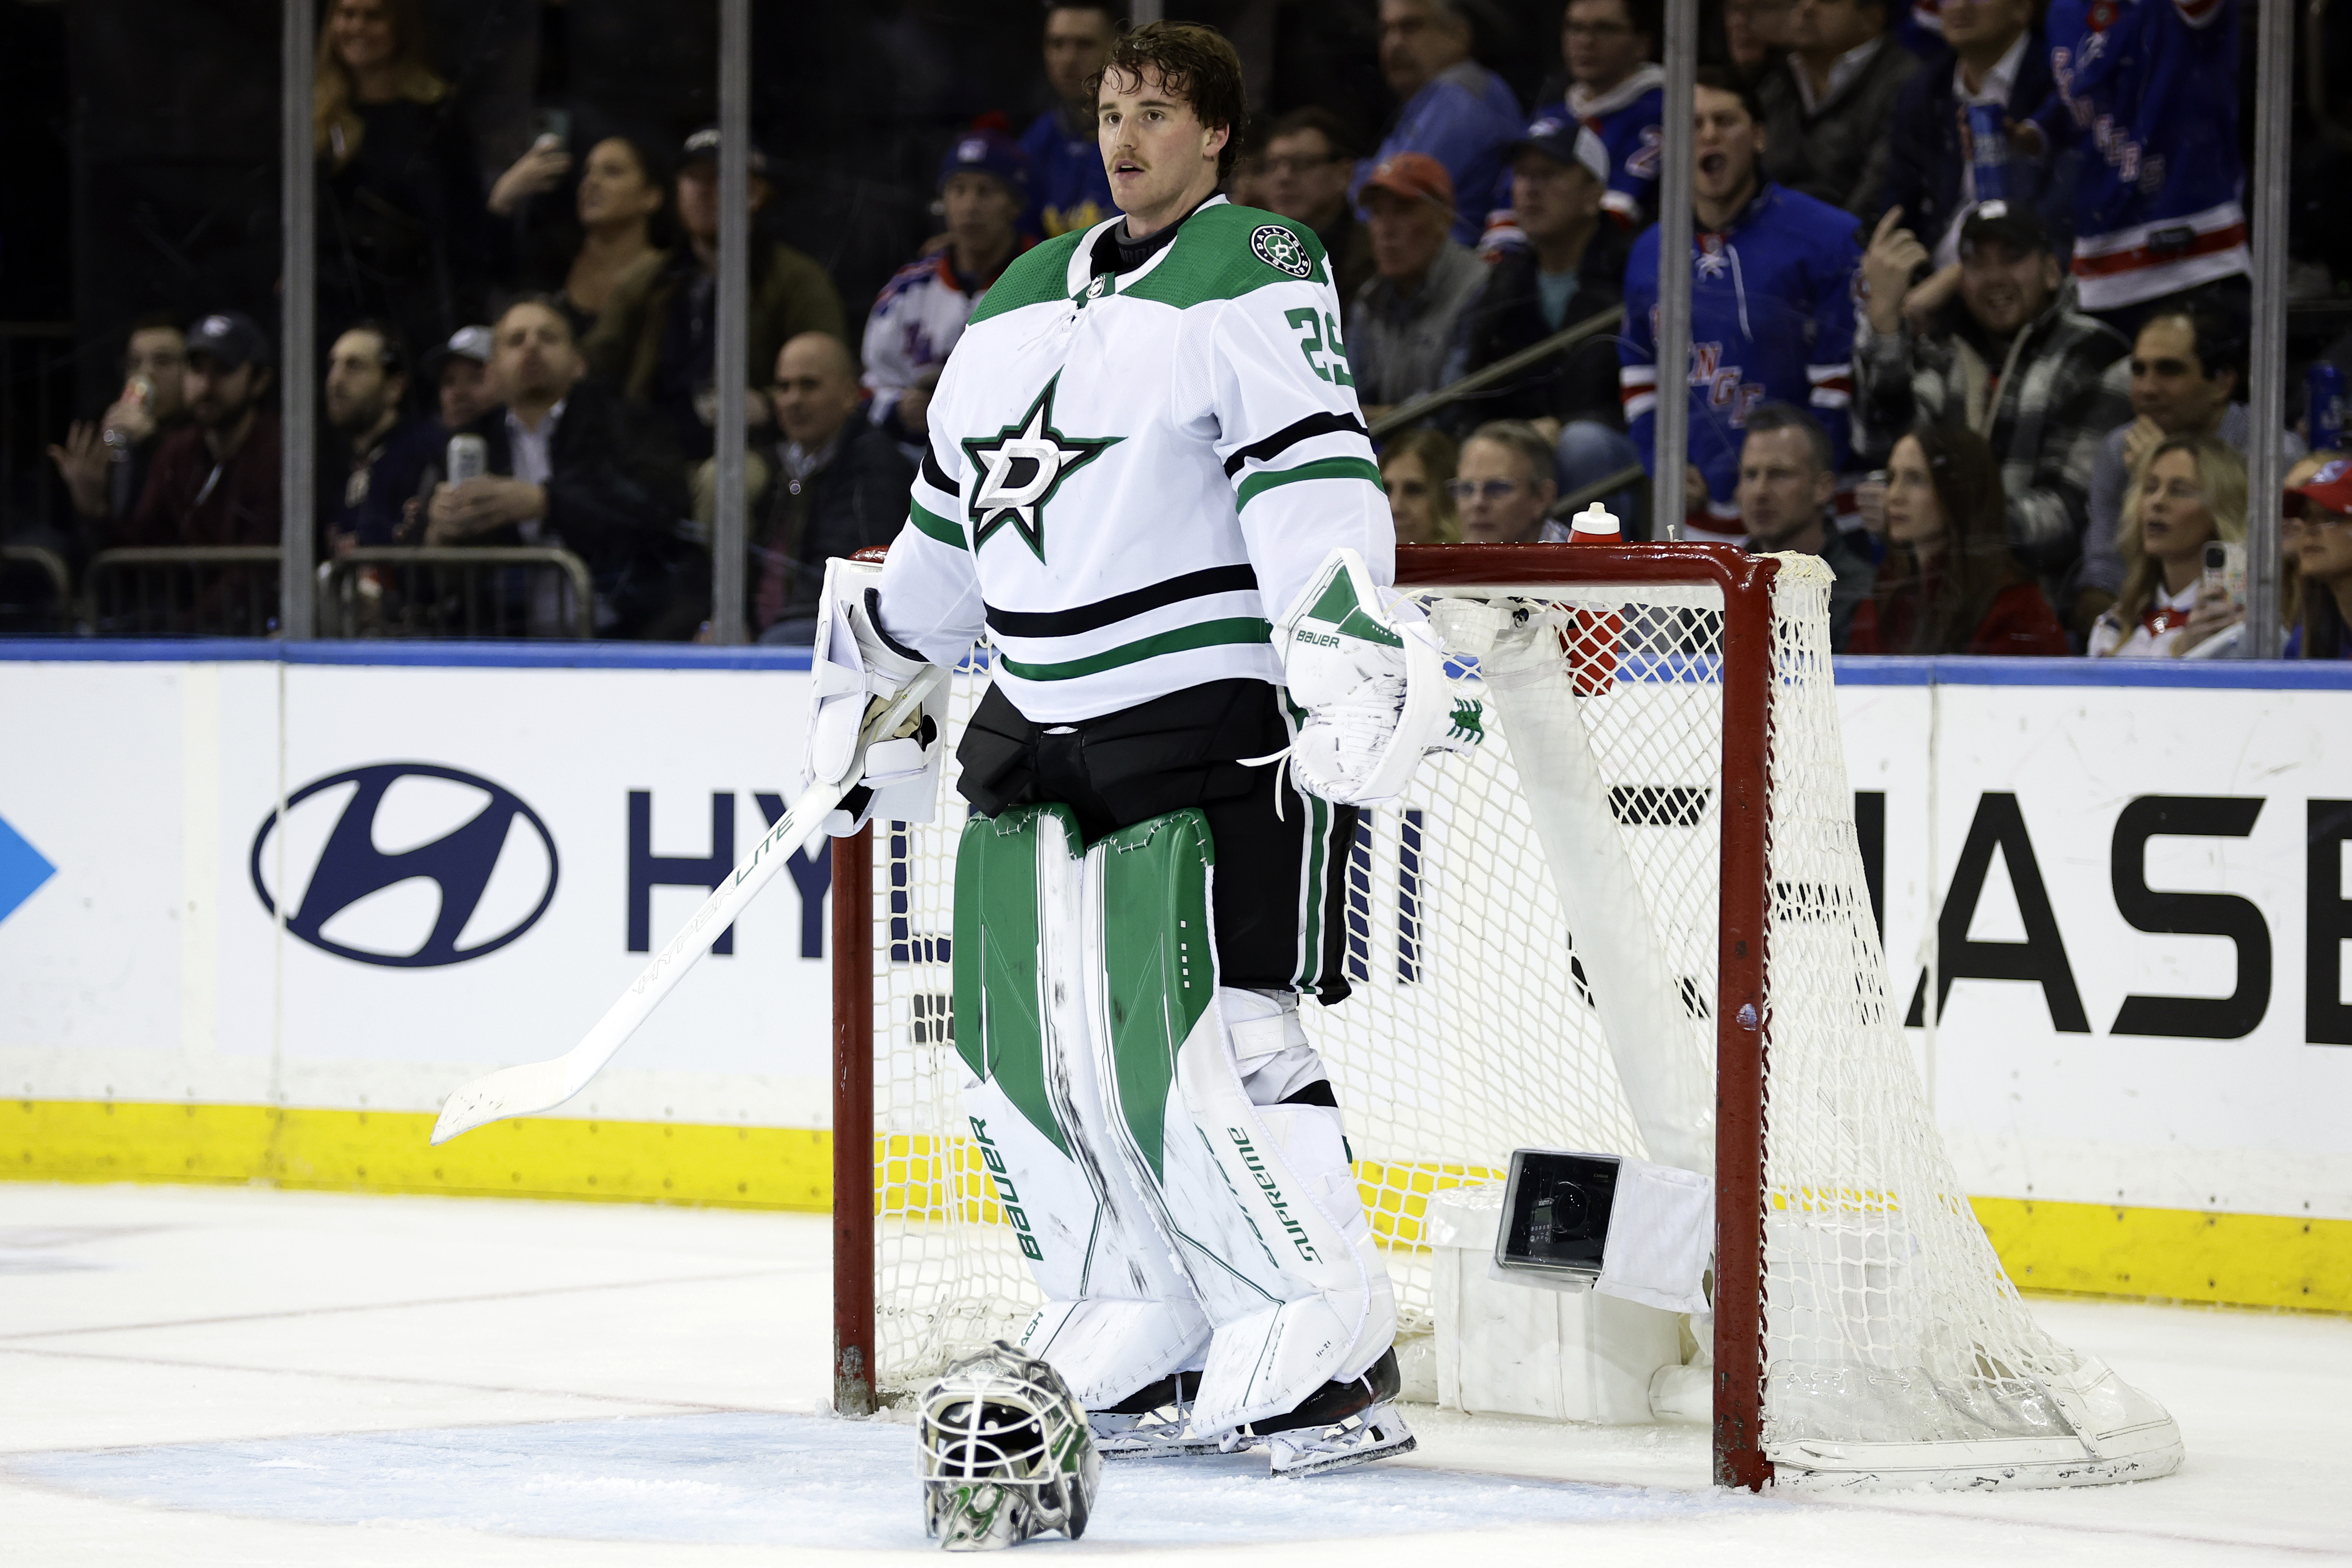 Jake Oettinger gives up late goal, Rangers rally to beat Stars 2-1 in OT